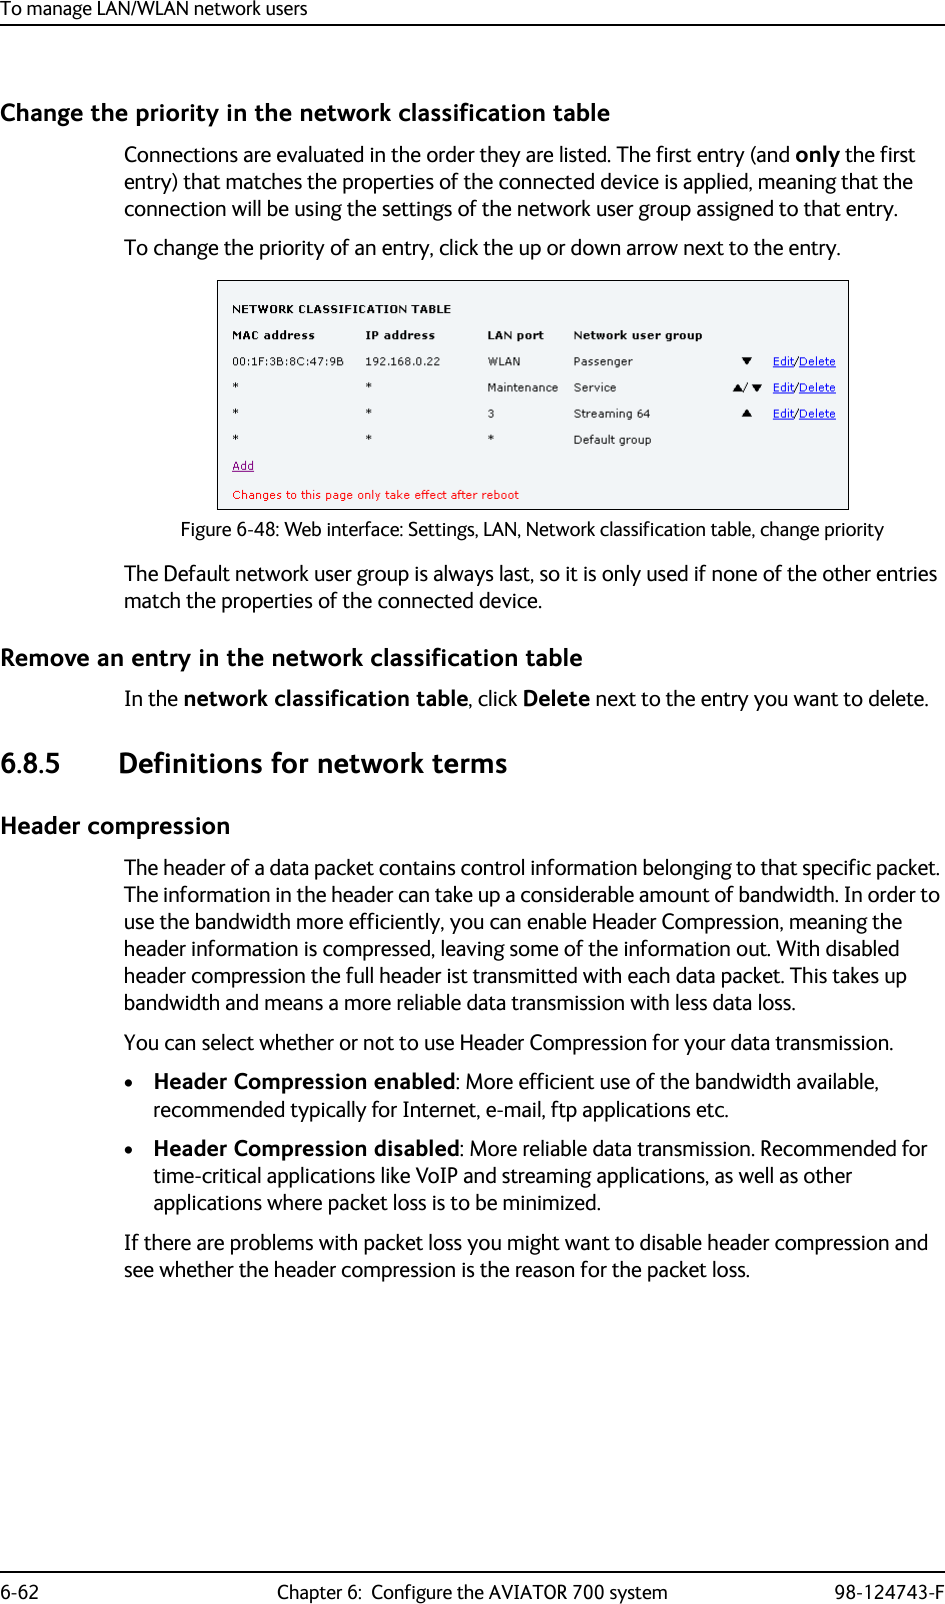 To manage LAN/WLAN network users6-62 Chapter 6:  Configure the AVIATOR 700 system 98-124743-FChange the priority in the network classification tableConnections are evaluated in the order they are listed. The first entry (and only the first entry) that matches the properties of the connected device is applied, meaning that the connection will be using the settings of the network user group assigned to that entry.To change the priority of an entry, click the up or down arrow next to the entry.Figure 6-48: Web interface: Settings, LAN, Network classification table, change priorityThe Default network user group is always last, so it is only used if none of the other entries match the properties of the connected device.Remove an entry in the network classification tableIn the network classification table, click Delete next to the entry you want to delete.6.8.5 Definitions for network termsHeader compressionThe header of a data packet contains control information belonging to that specific packet. The information in the header can take up a considerable amount of bandwidth. In order to use the bandwidth more efficiently, you can enable Header Compression, meaning the header information is compressed, leaving some of the information out. With disabled header compression the full header ist transmitted with each data packet. This takes up bandwidth and means a more reliable data transmission with less data loss. You can select whether or not to use Header Compression for your data transmission.•Header Compression enabled: More efficient use of the bandwidth available, recommended typically for Internet, e-mail, ftp applications etc.•Header Compression disabled: More reliable data transmission. Recommended for time-critical applications like VoIP and streaming applications, as well as other applications where packet loss is to be minimized.If there are problems with packet loss you might want to disable header compression and see whether the header compression is the reason for the packet loss. 